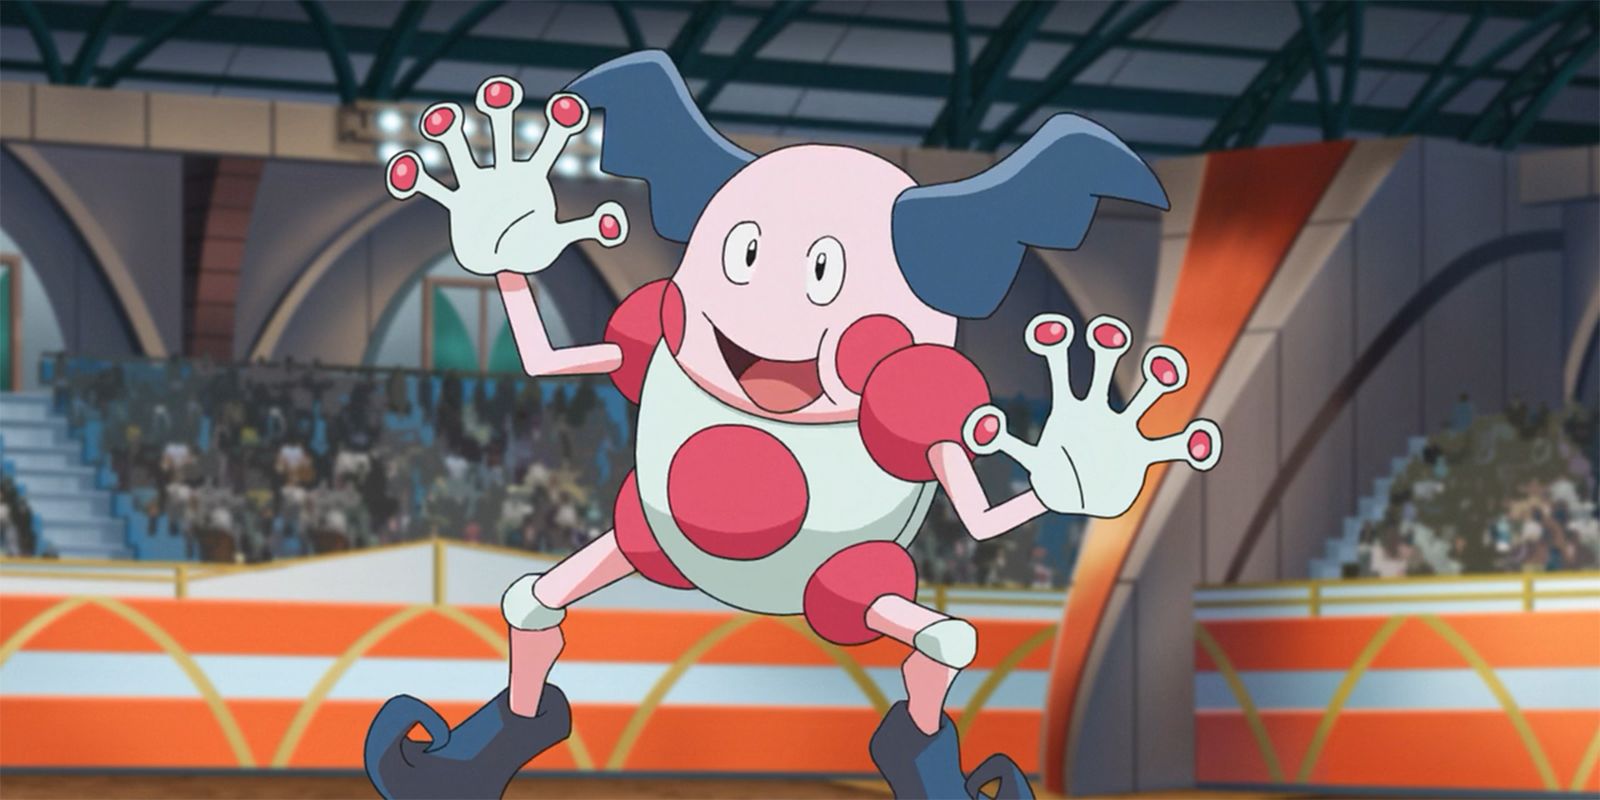 Mr. Mime from Pokemon